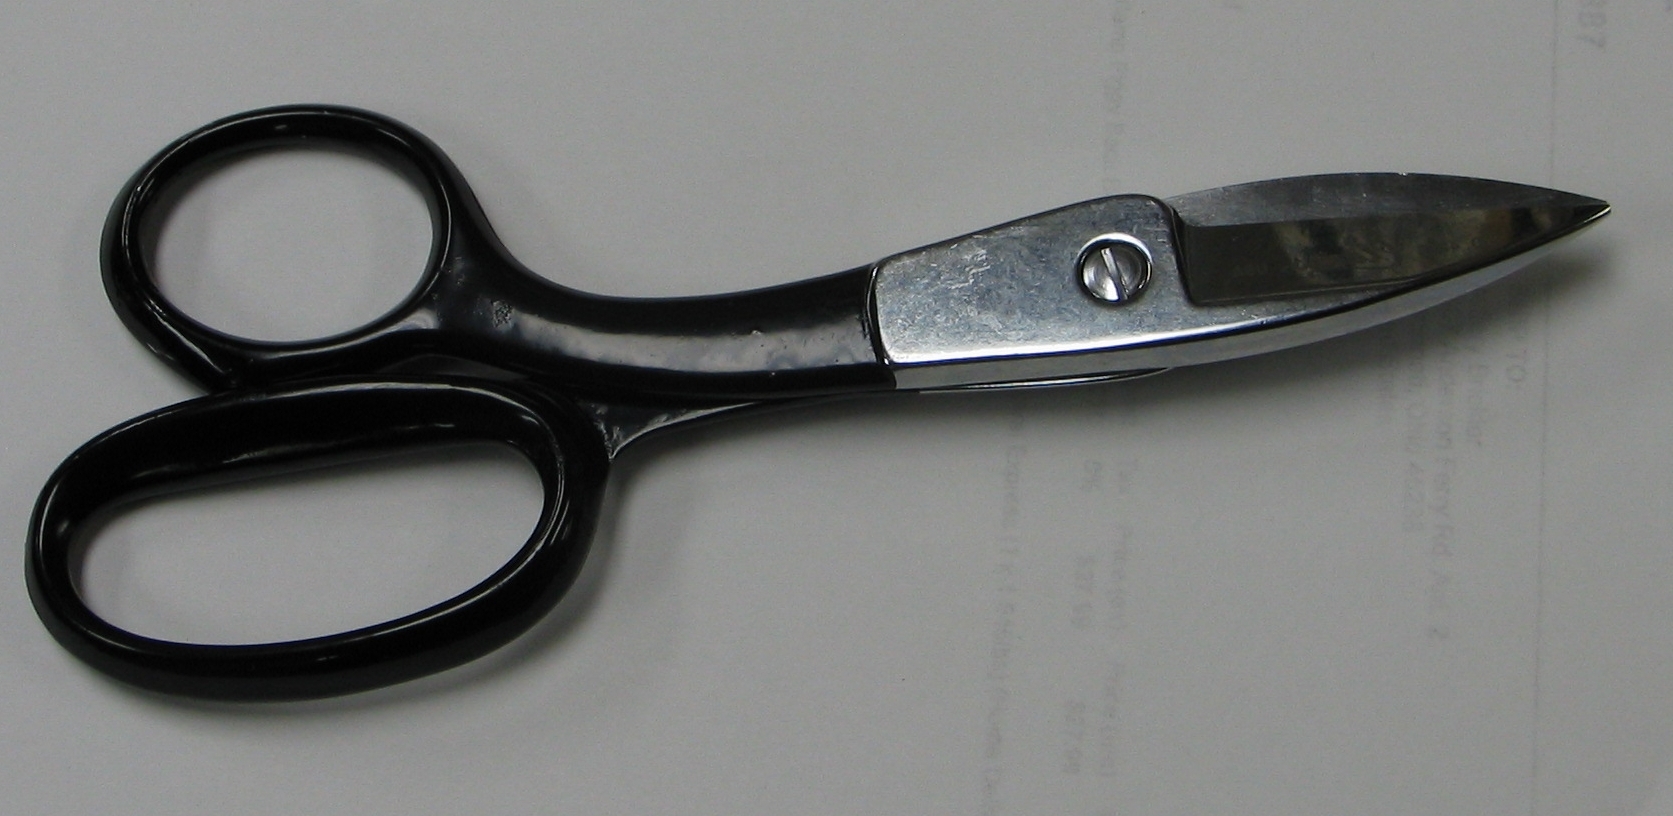 ROPE SHEARS--PROFESSIONAL